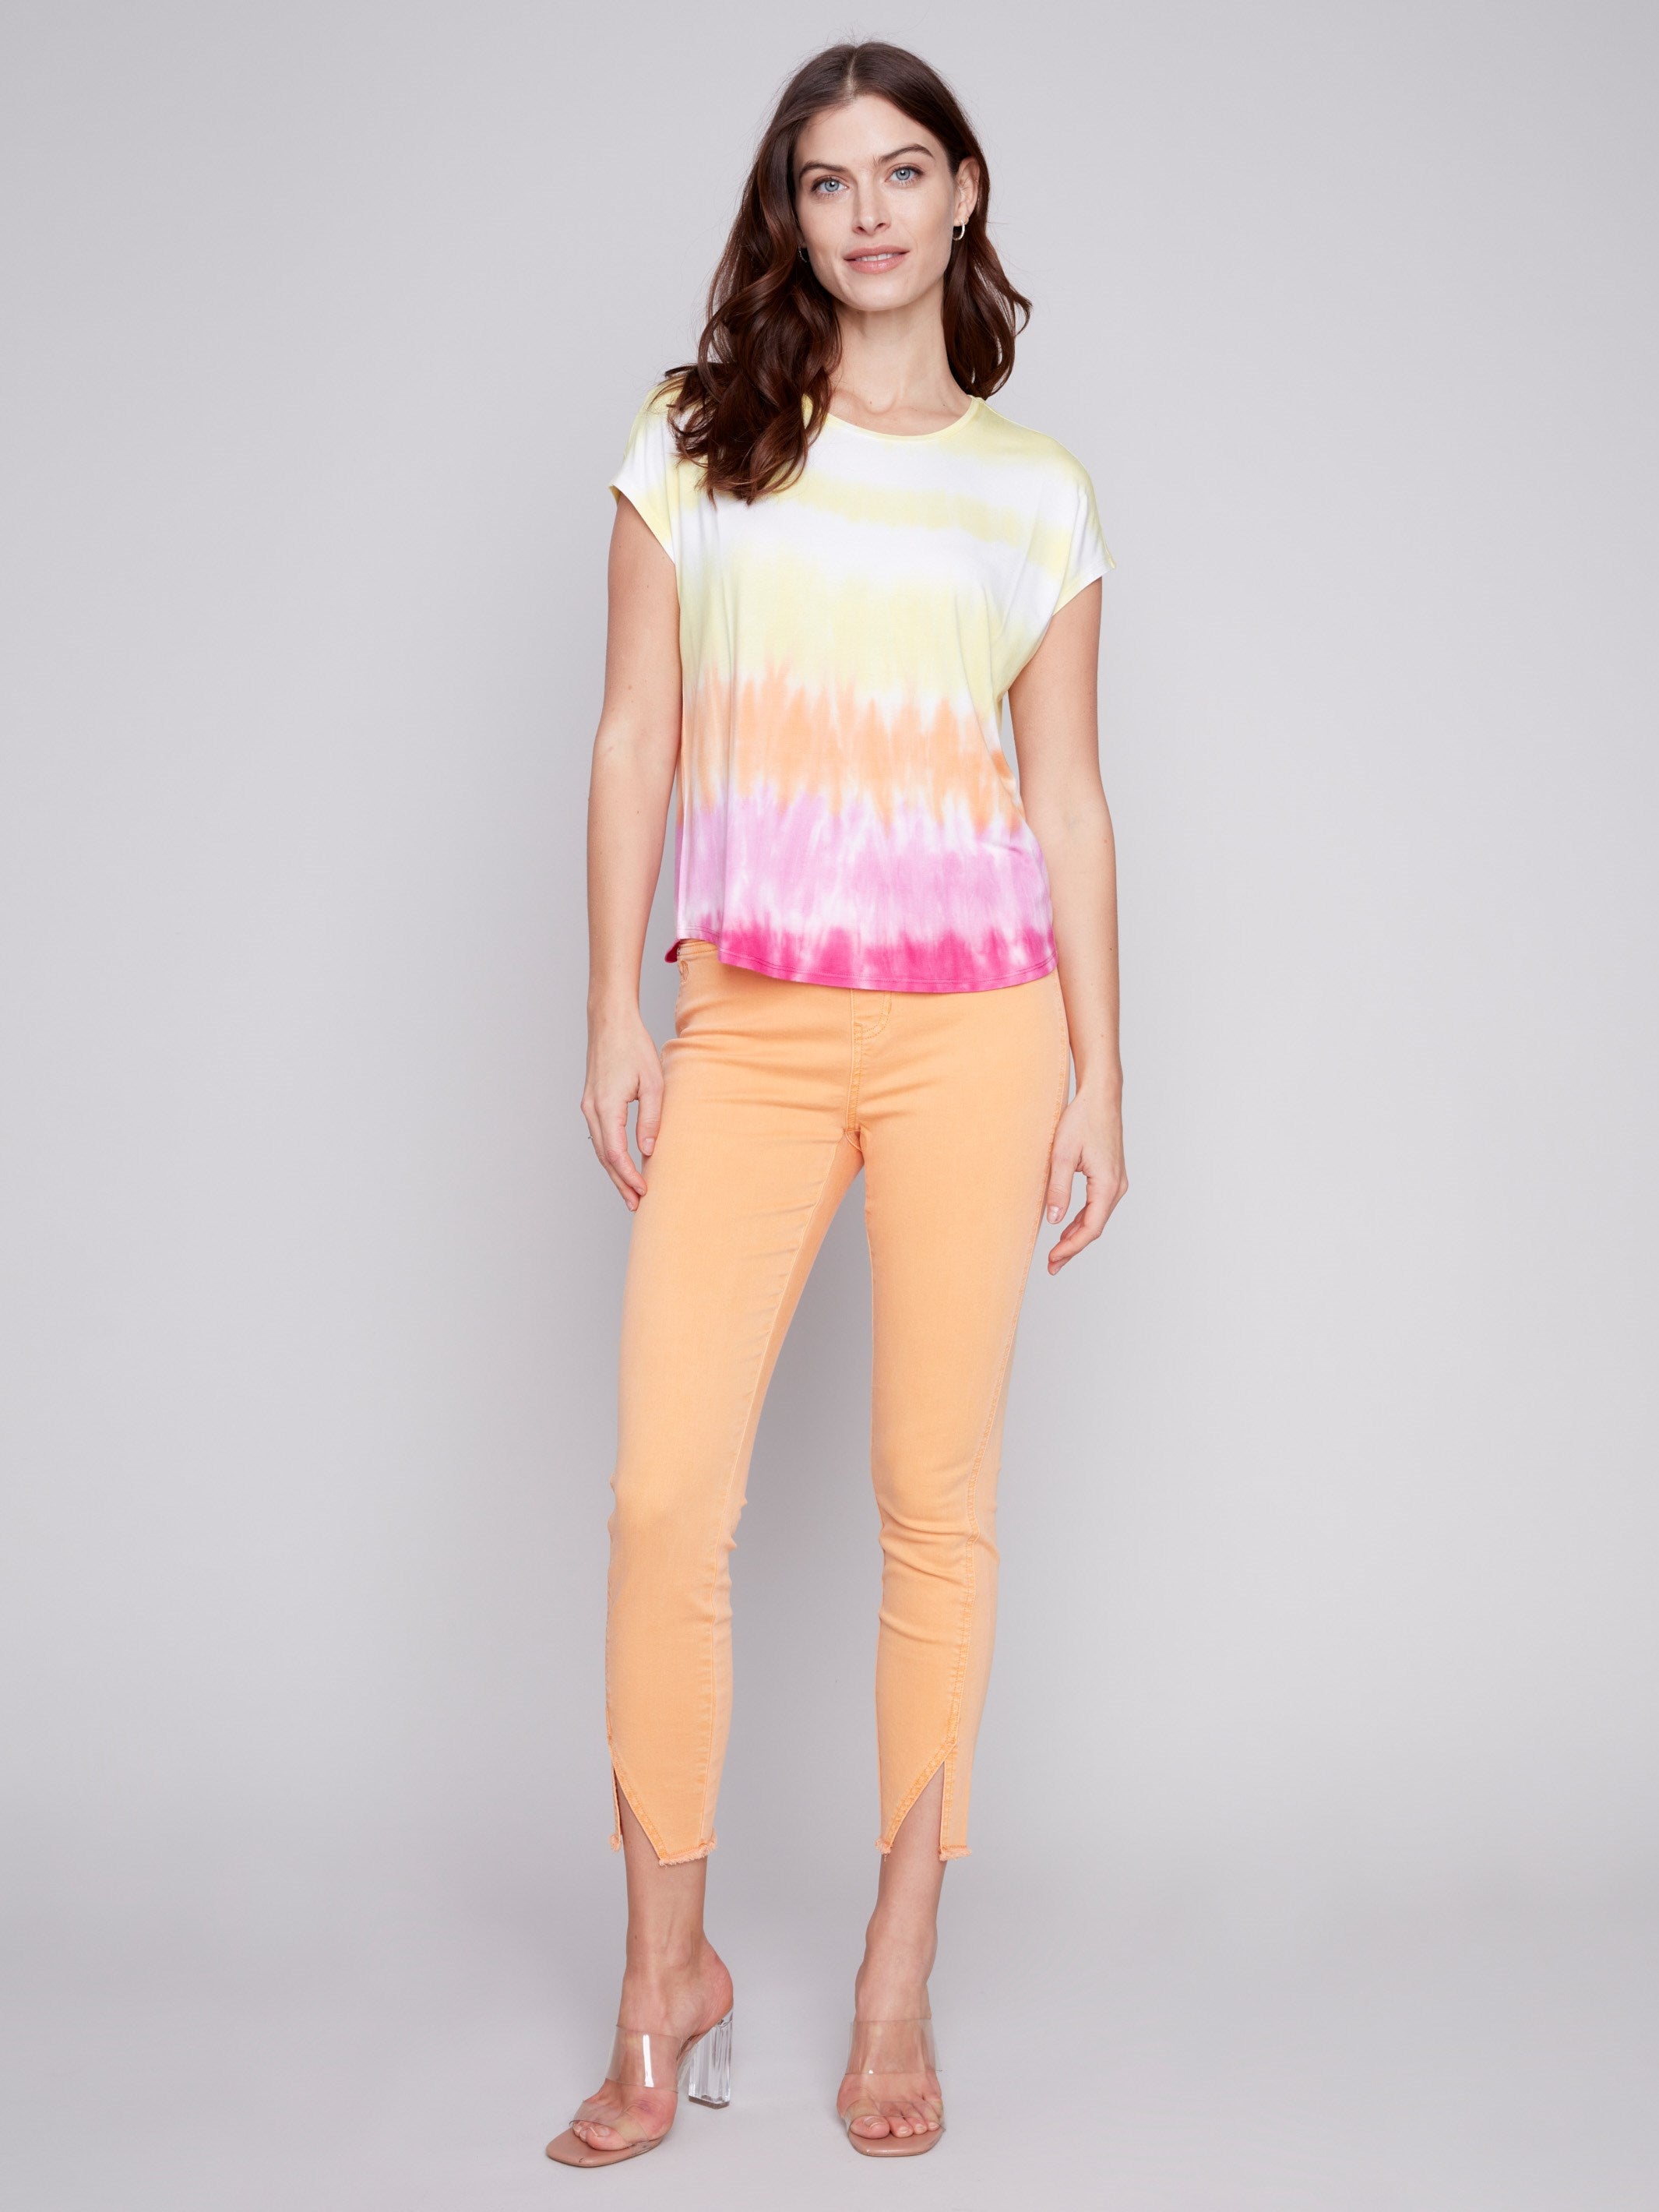 Printed Sleeveless Top - Sunset - Charlie B Collection Canada - Image 3